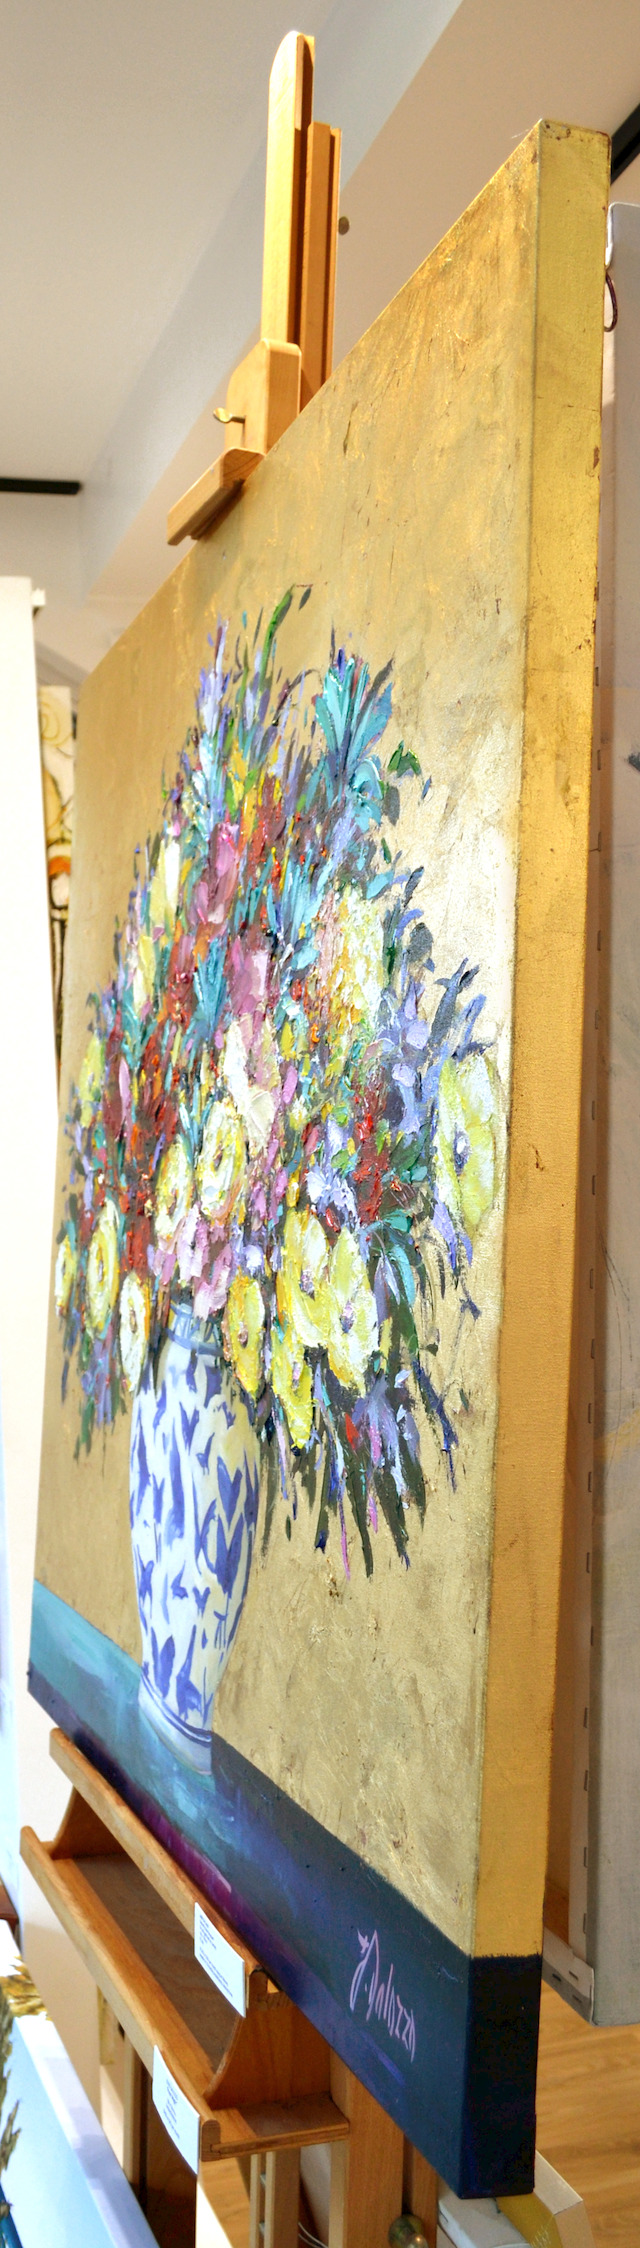 Side View 2 Of Still Life Painting "Butterfly Vase Bouquet" By Judith Dalozzo